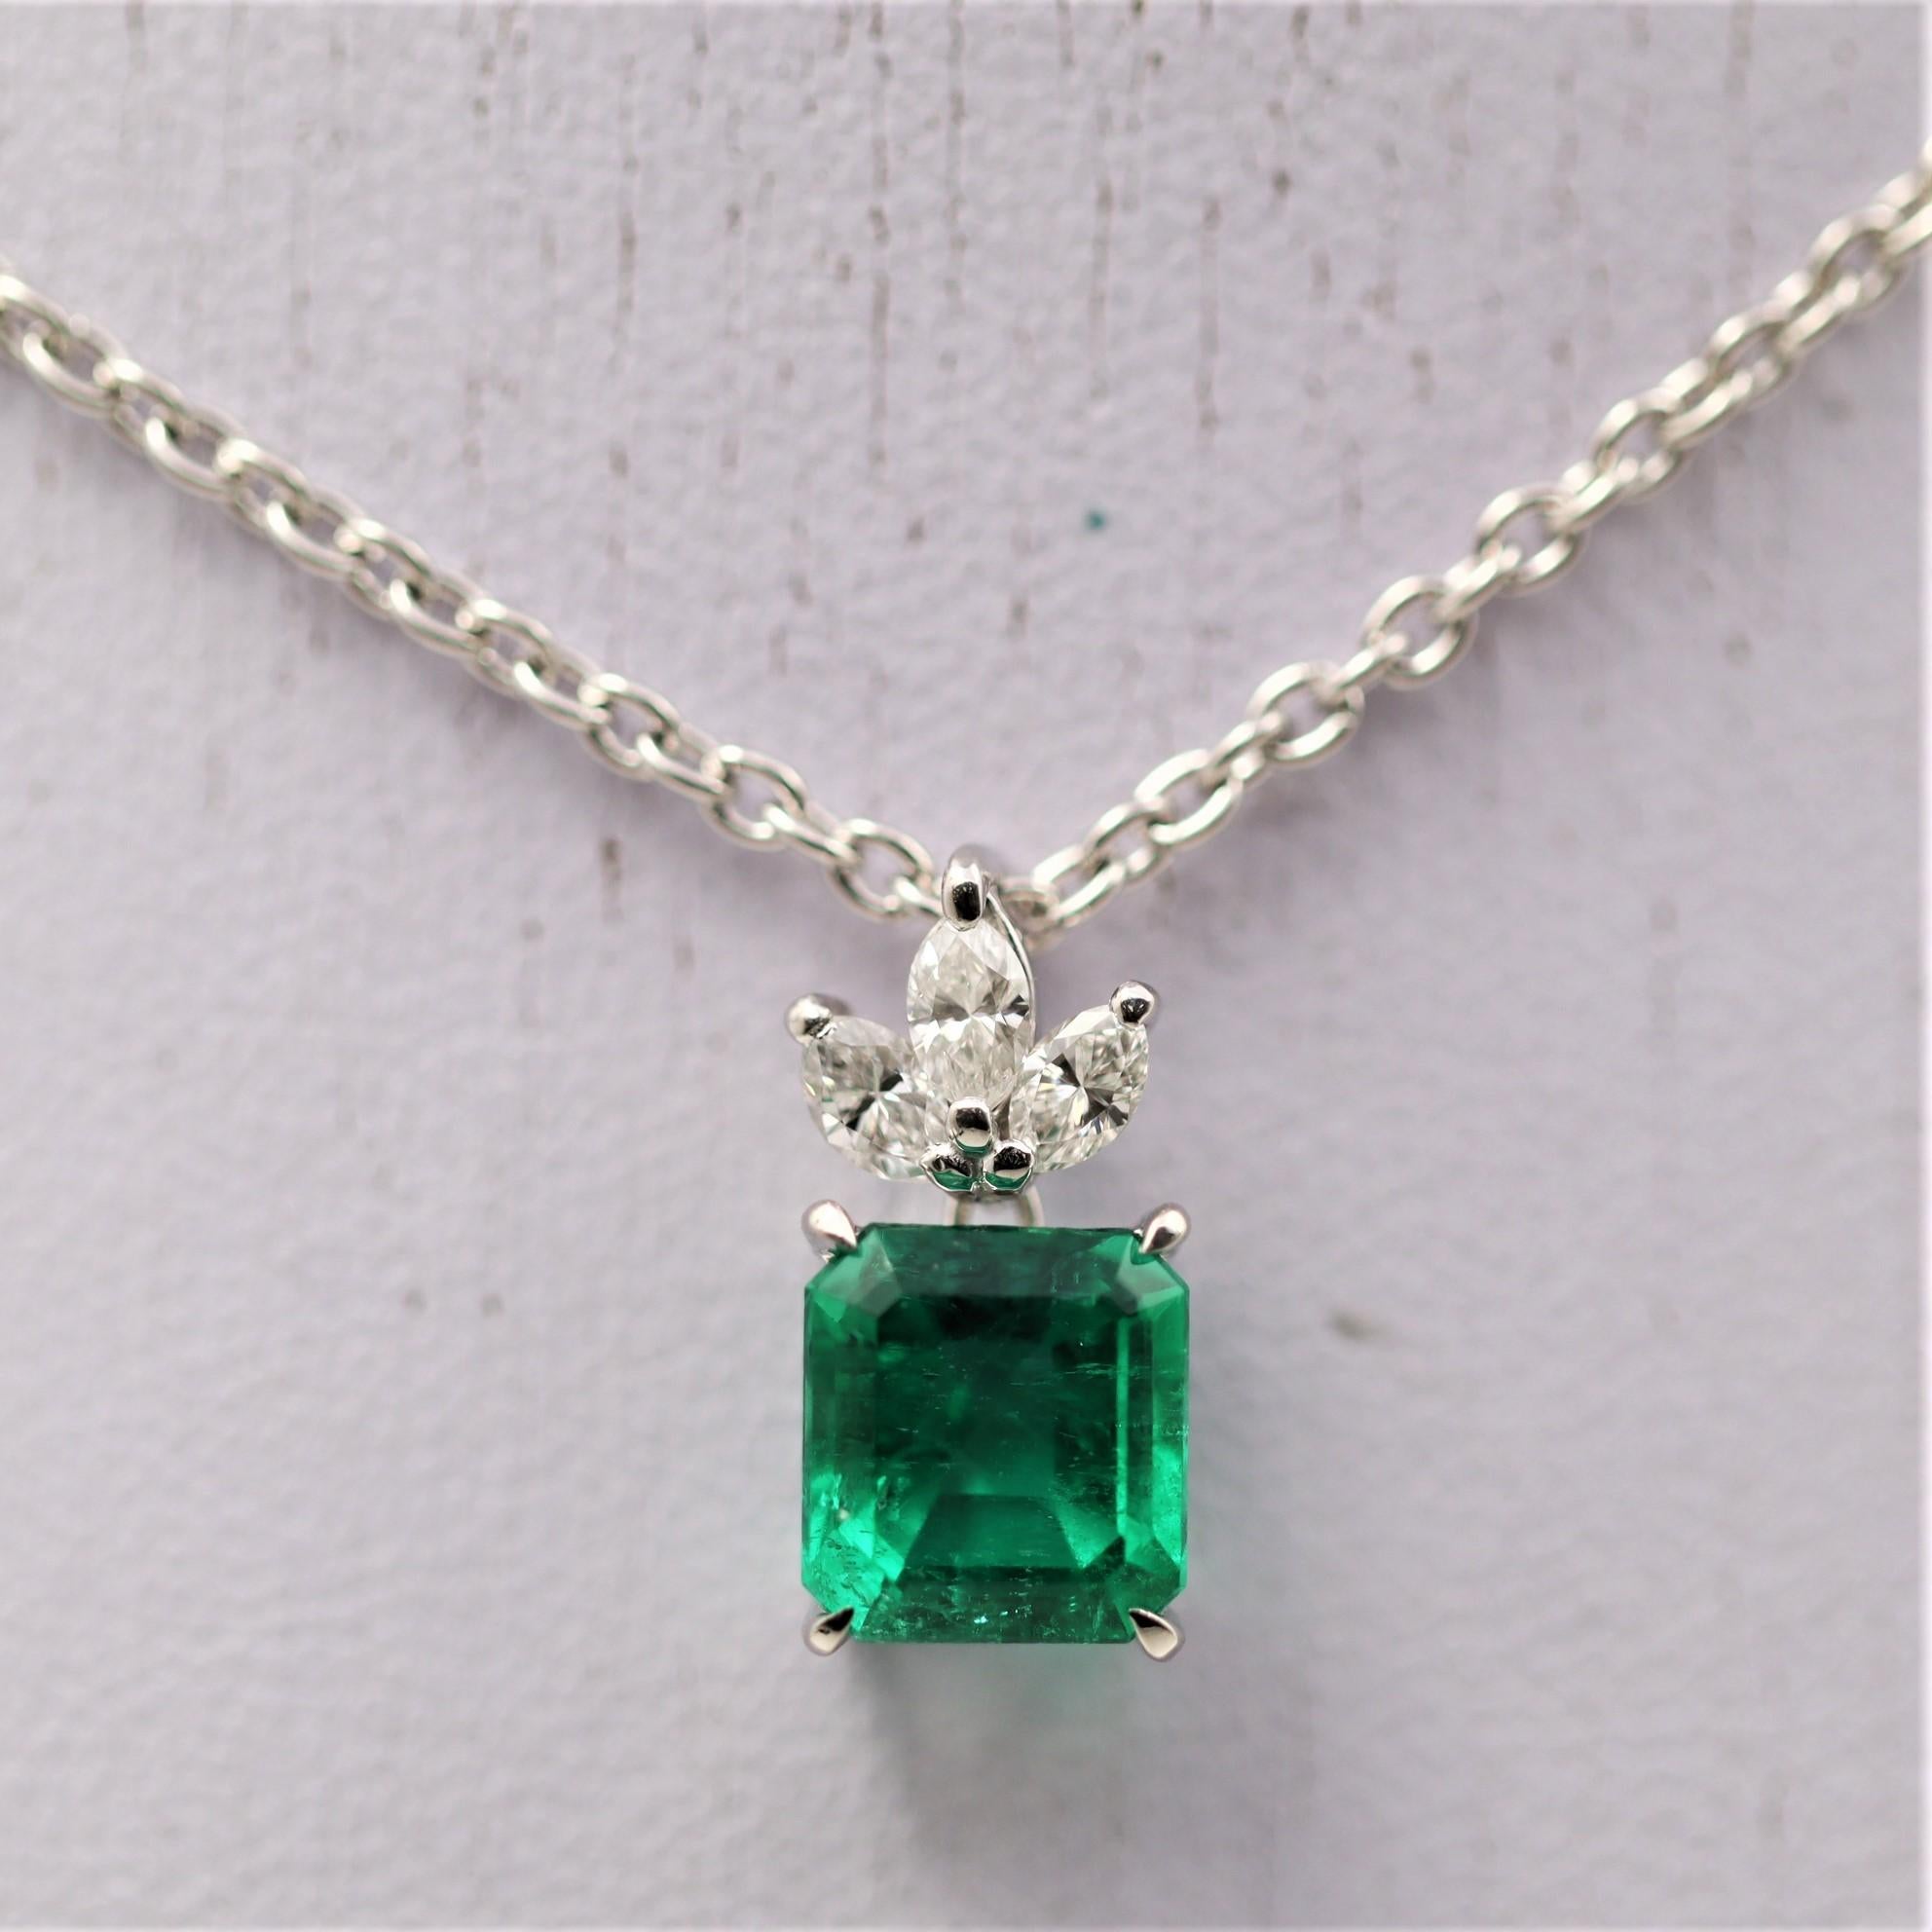 Mesmerizingly beautiful! The emerald weighs 2.16 carats and has a rich vivid grass green color seen only in the finest Colombian stones. We believe this particular emerald came from the famed Muzo mine in Colombia because of the rich unique color.